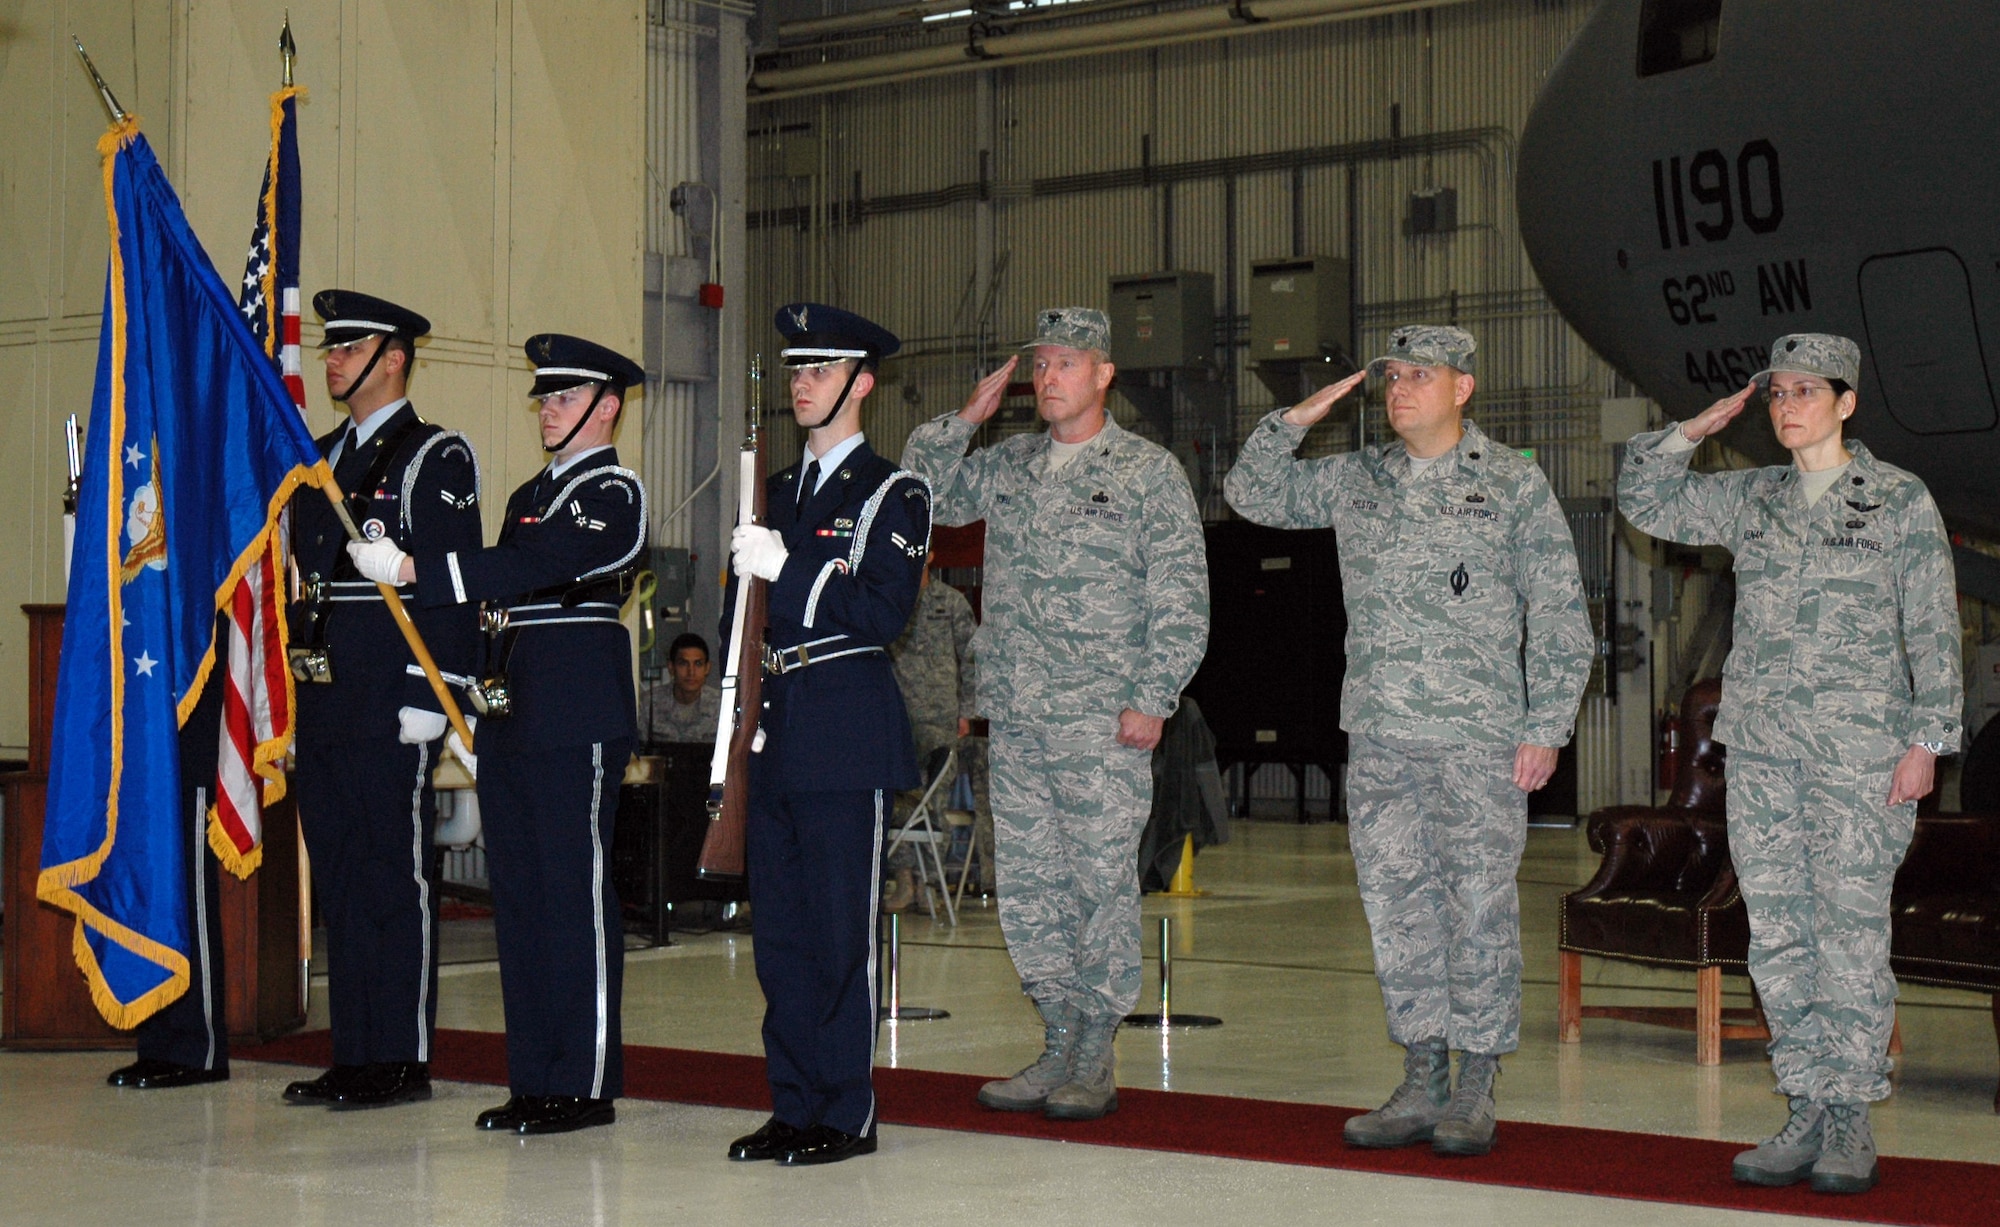 (From left to right) Members of the Honor Guard post the Colors, Col. Gerald Vowell, 446th Mission Support Group commander, Lt. Col. William Pelster, 446th Force Support Squadron commander, and Lt. Col. Patricia Keenan, 446th Services Flight, lead the 446th FSS activation ceremony on Dec. 5. The 446th Mission Support Squadron commanded by Colonel Pelster was deactivated and the 446th Services Flight commanded by Colonel Keenan was redesignated, combining both units to form the new 446th Force Support Squadron. (U.S. Air Force photo/Staff Sgt. Elizabeth Moody)